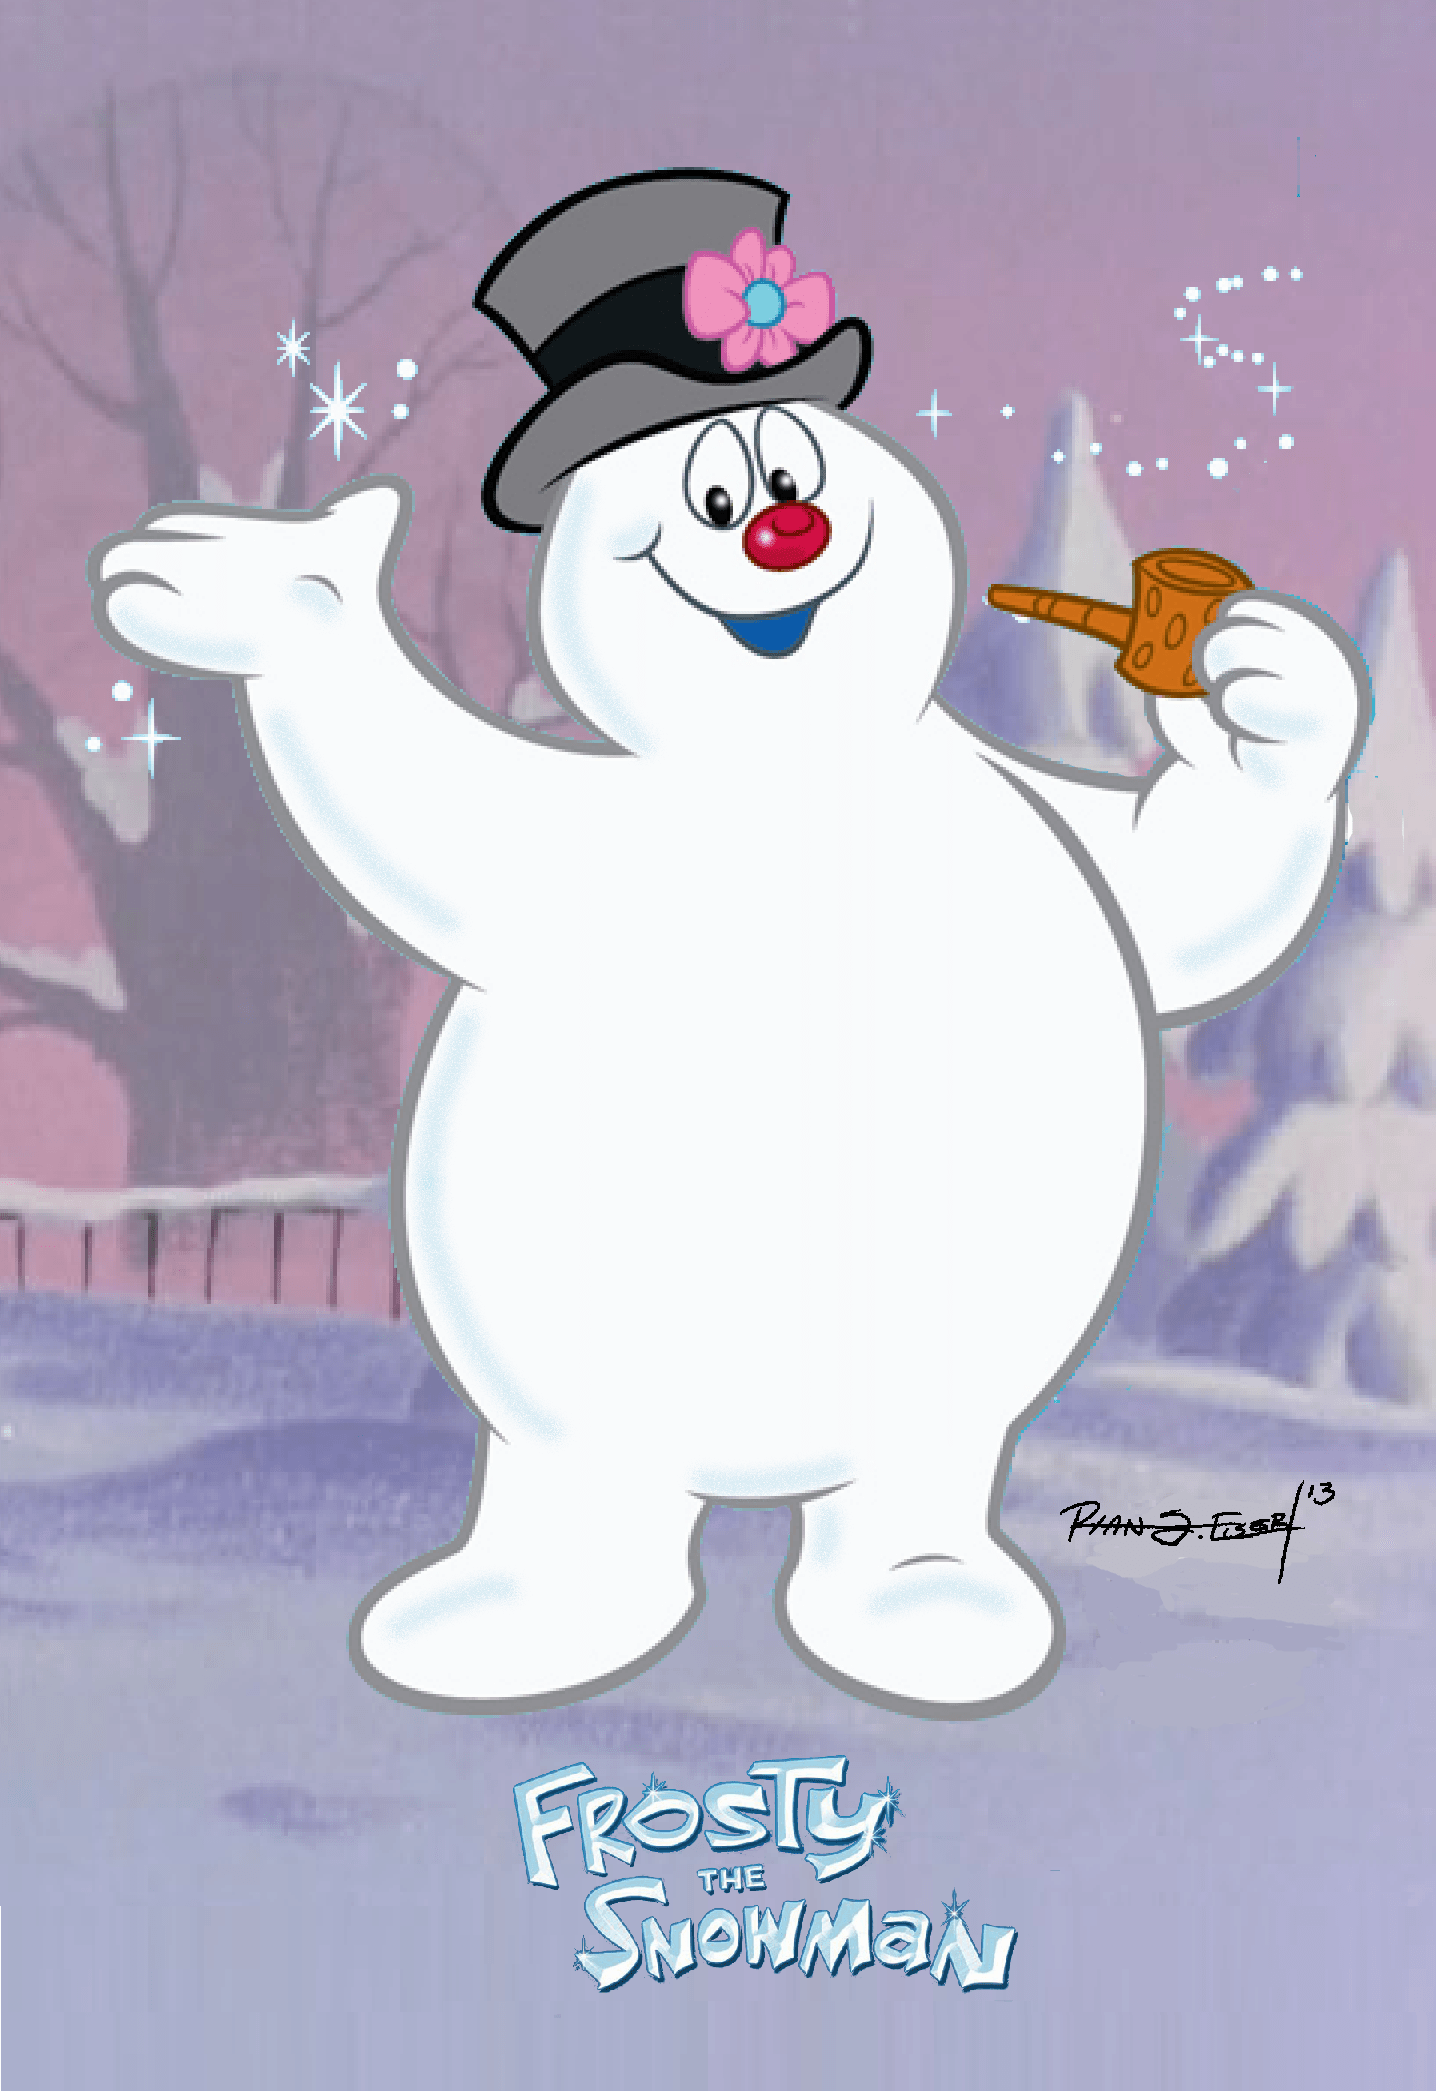 Frosty the Snowman Model by EisWorks